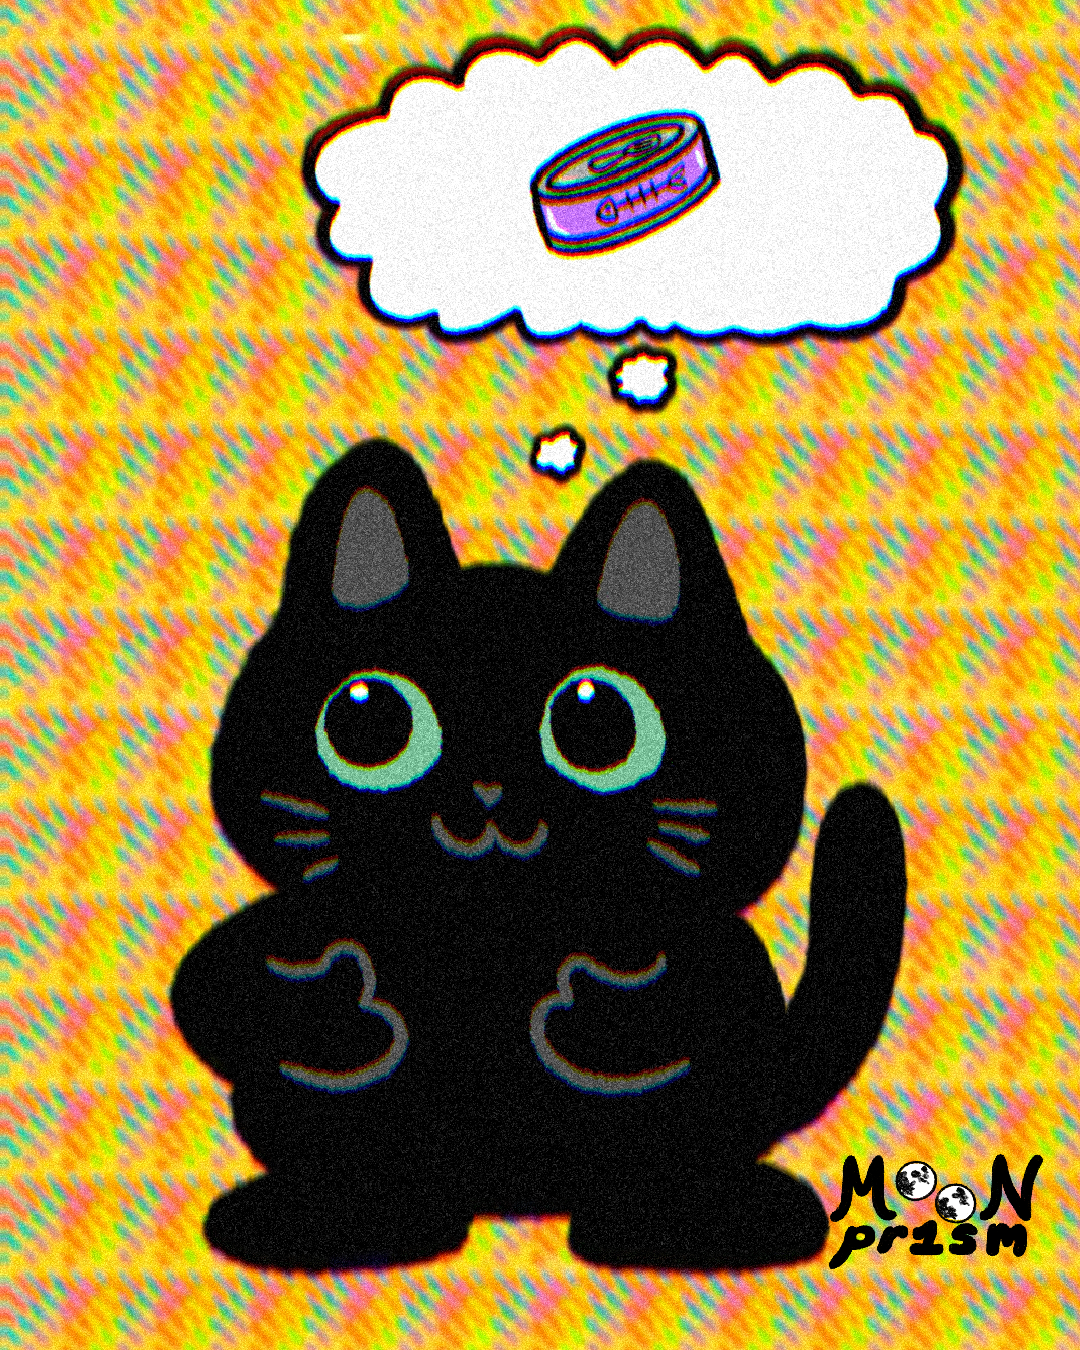 An illustration of the artist's cat, Onyx. She is chubby and polydactyl! She is happily thinking about her dinner of canned salmon.